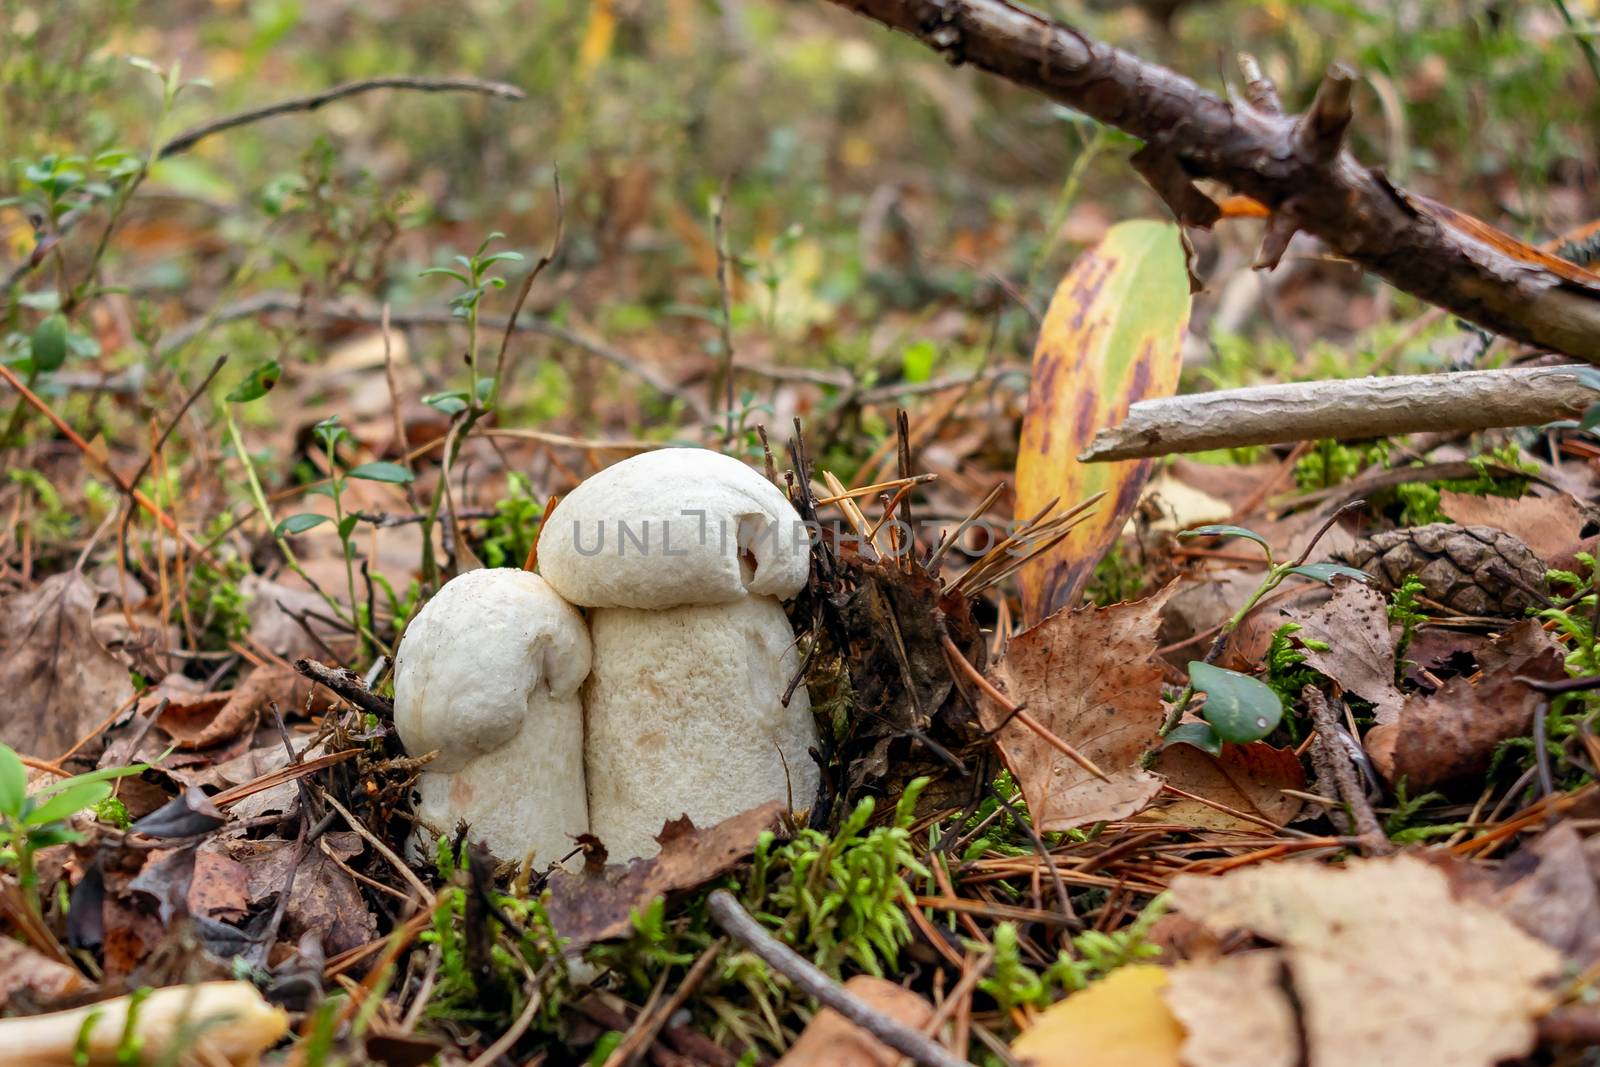 Two beautiful little mushrooms Leccinum percandidum, known as a Orange birch bolete, grows in a forest - image.